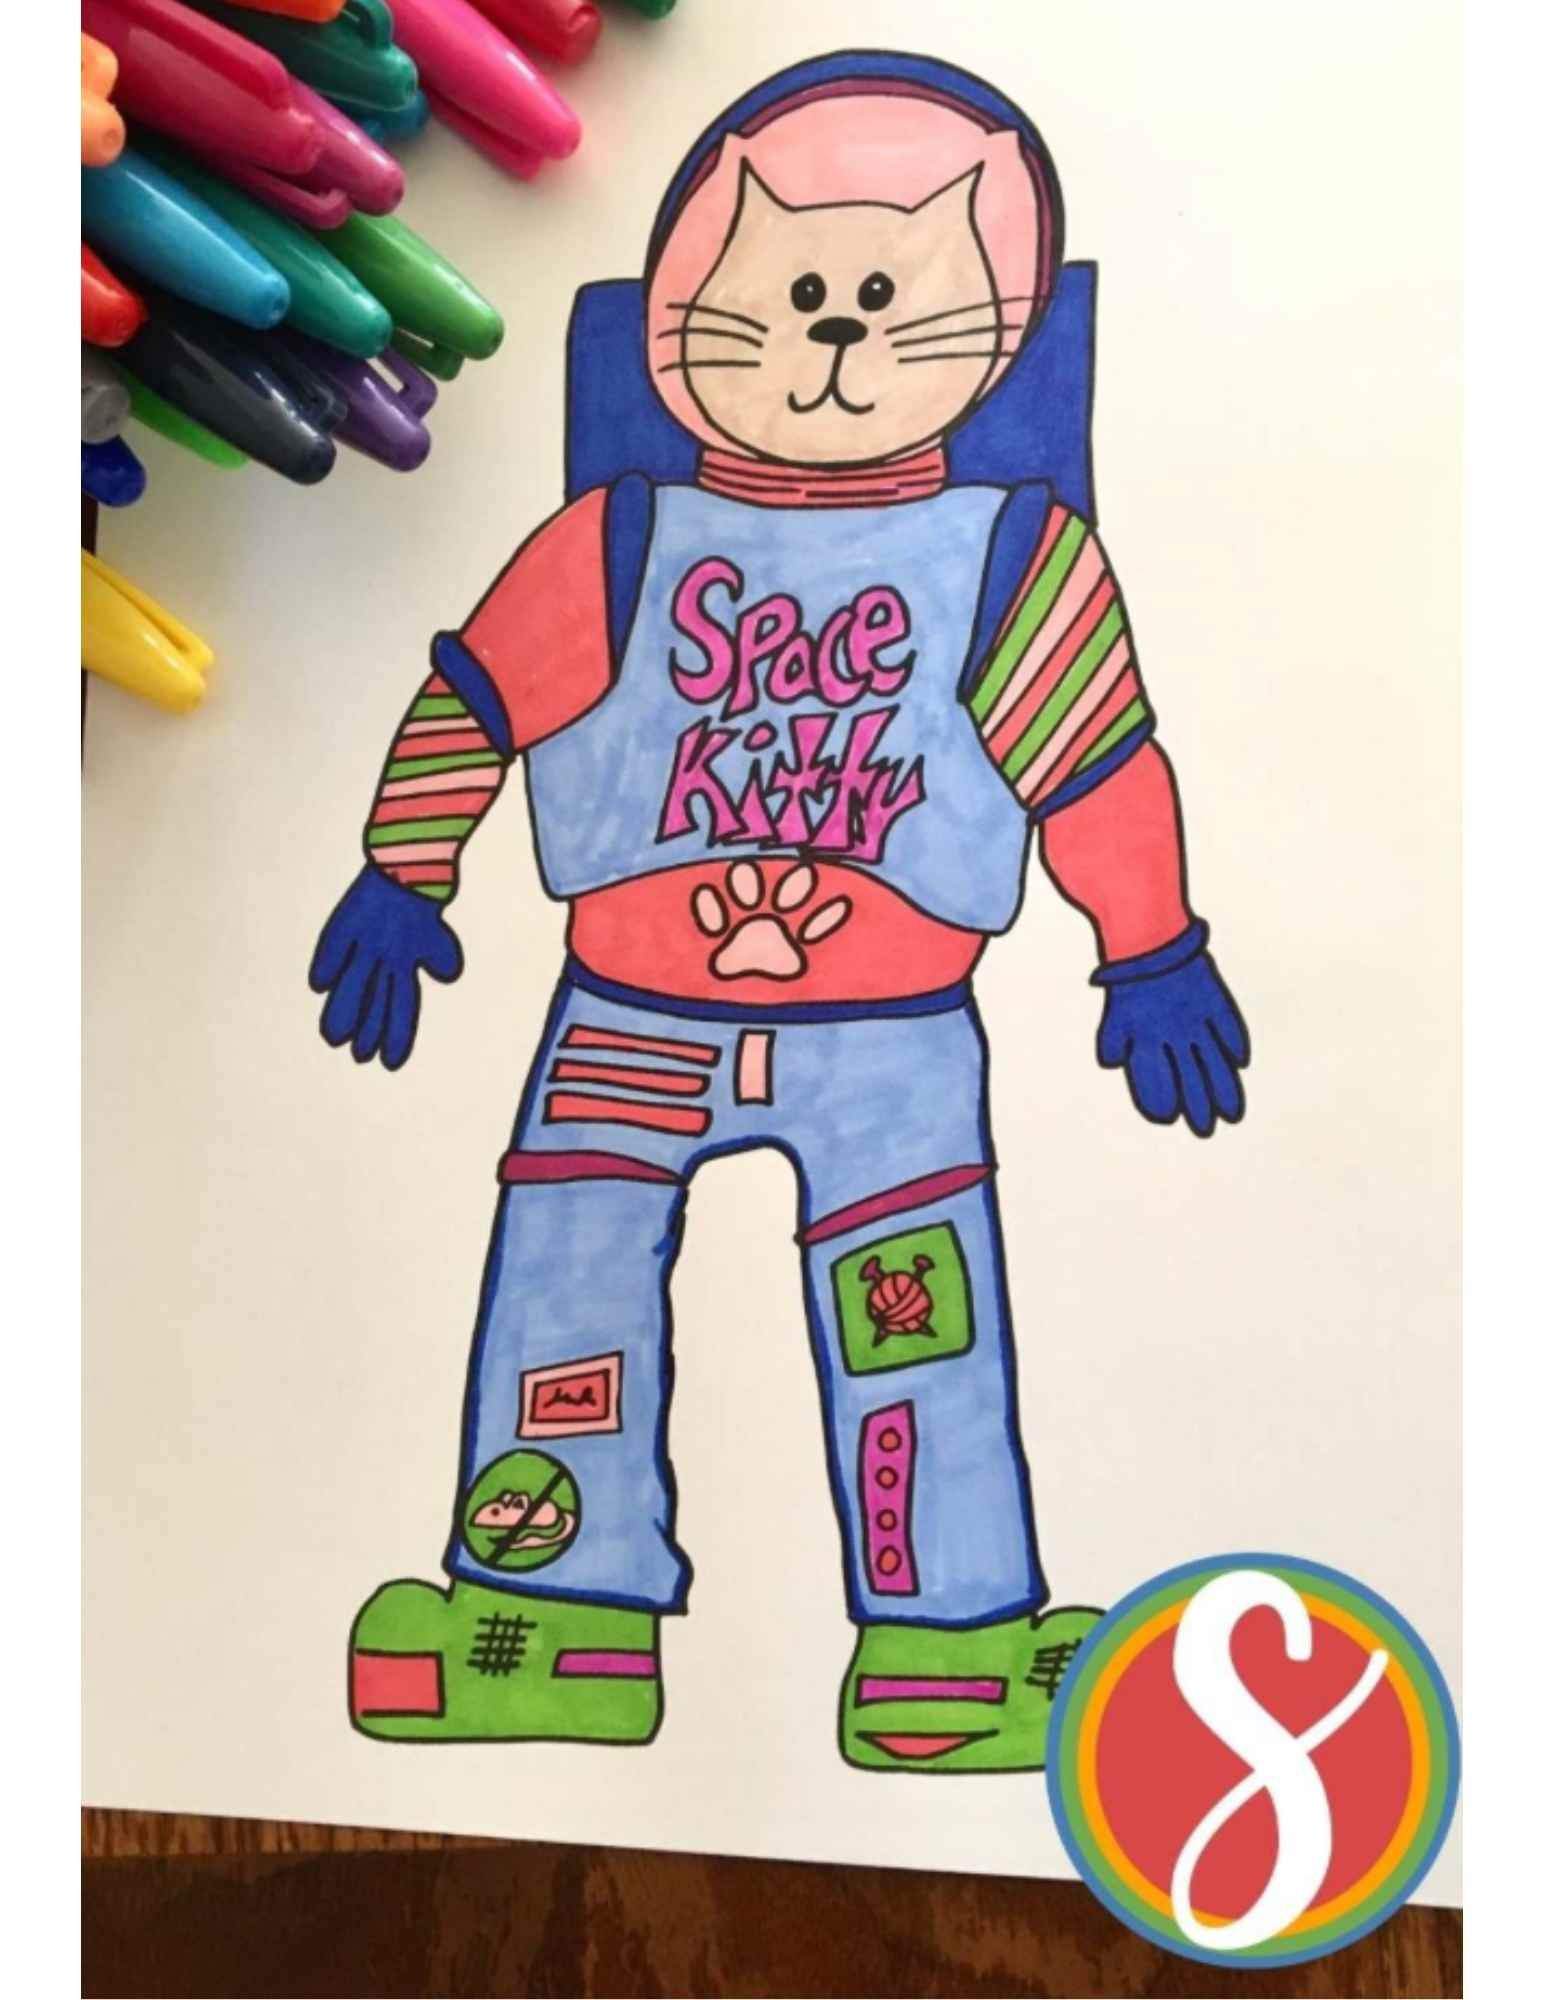 cat coloring page with cat in astronaut suit that says "space kitty" on its chest